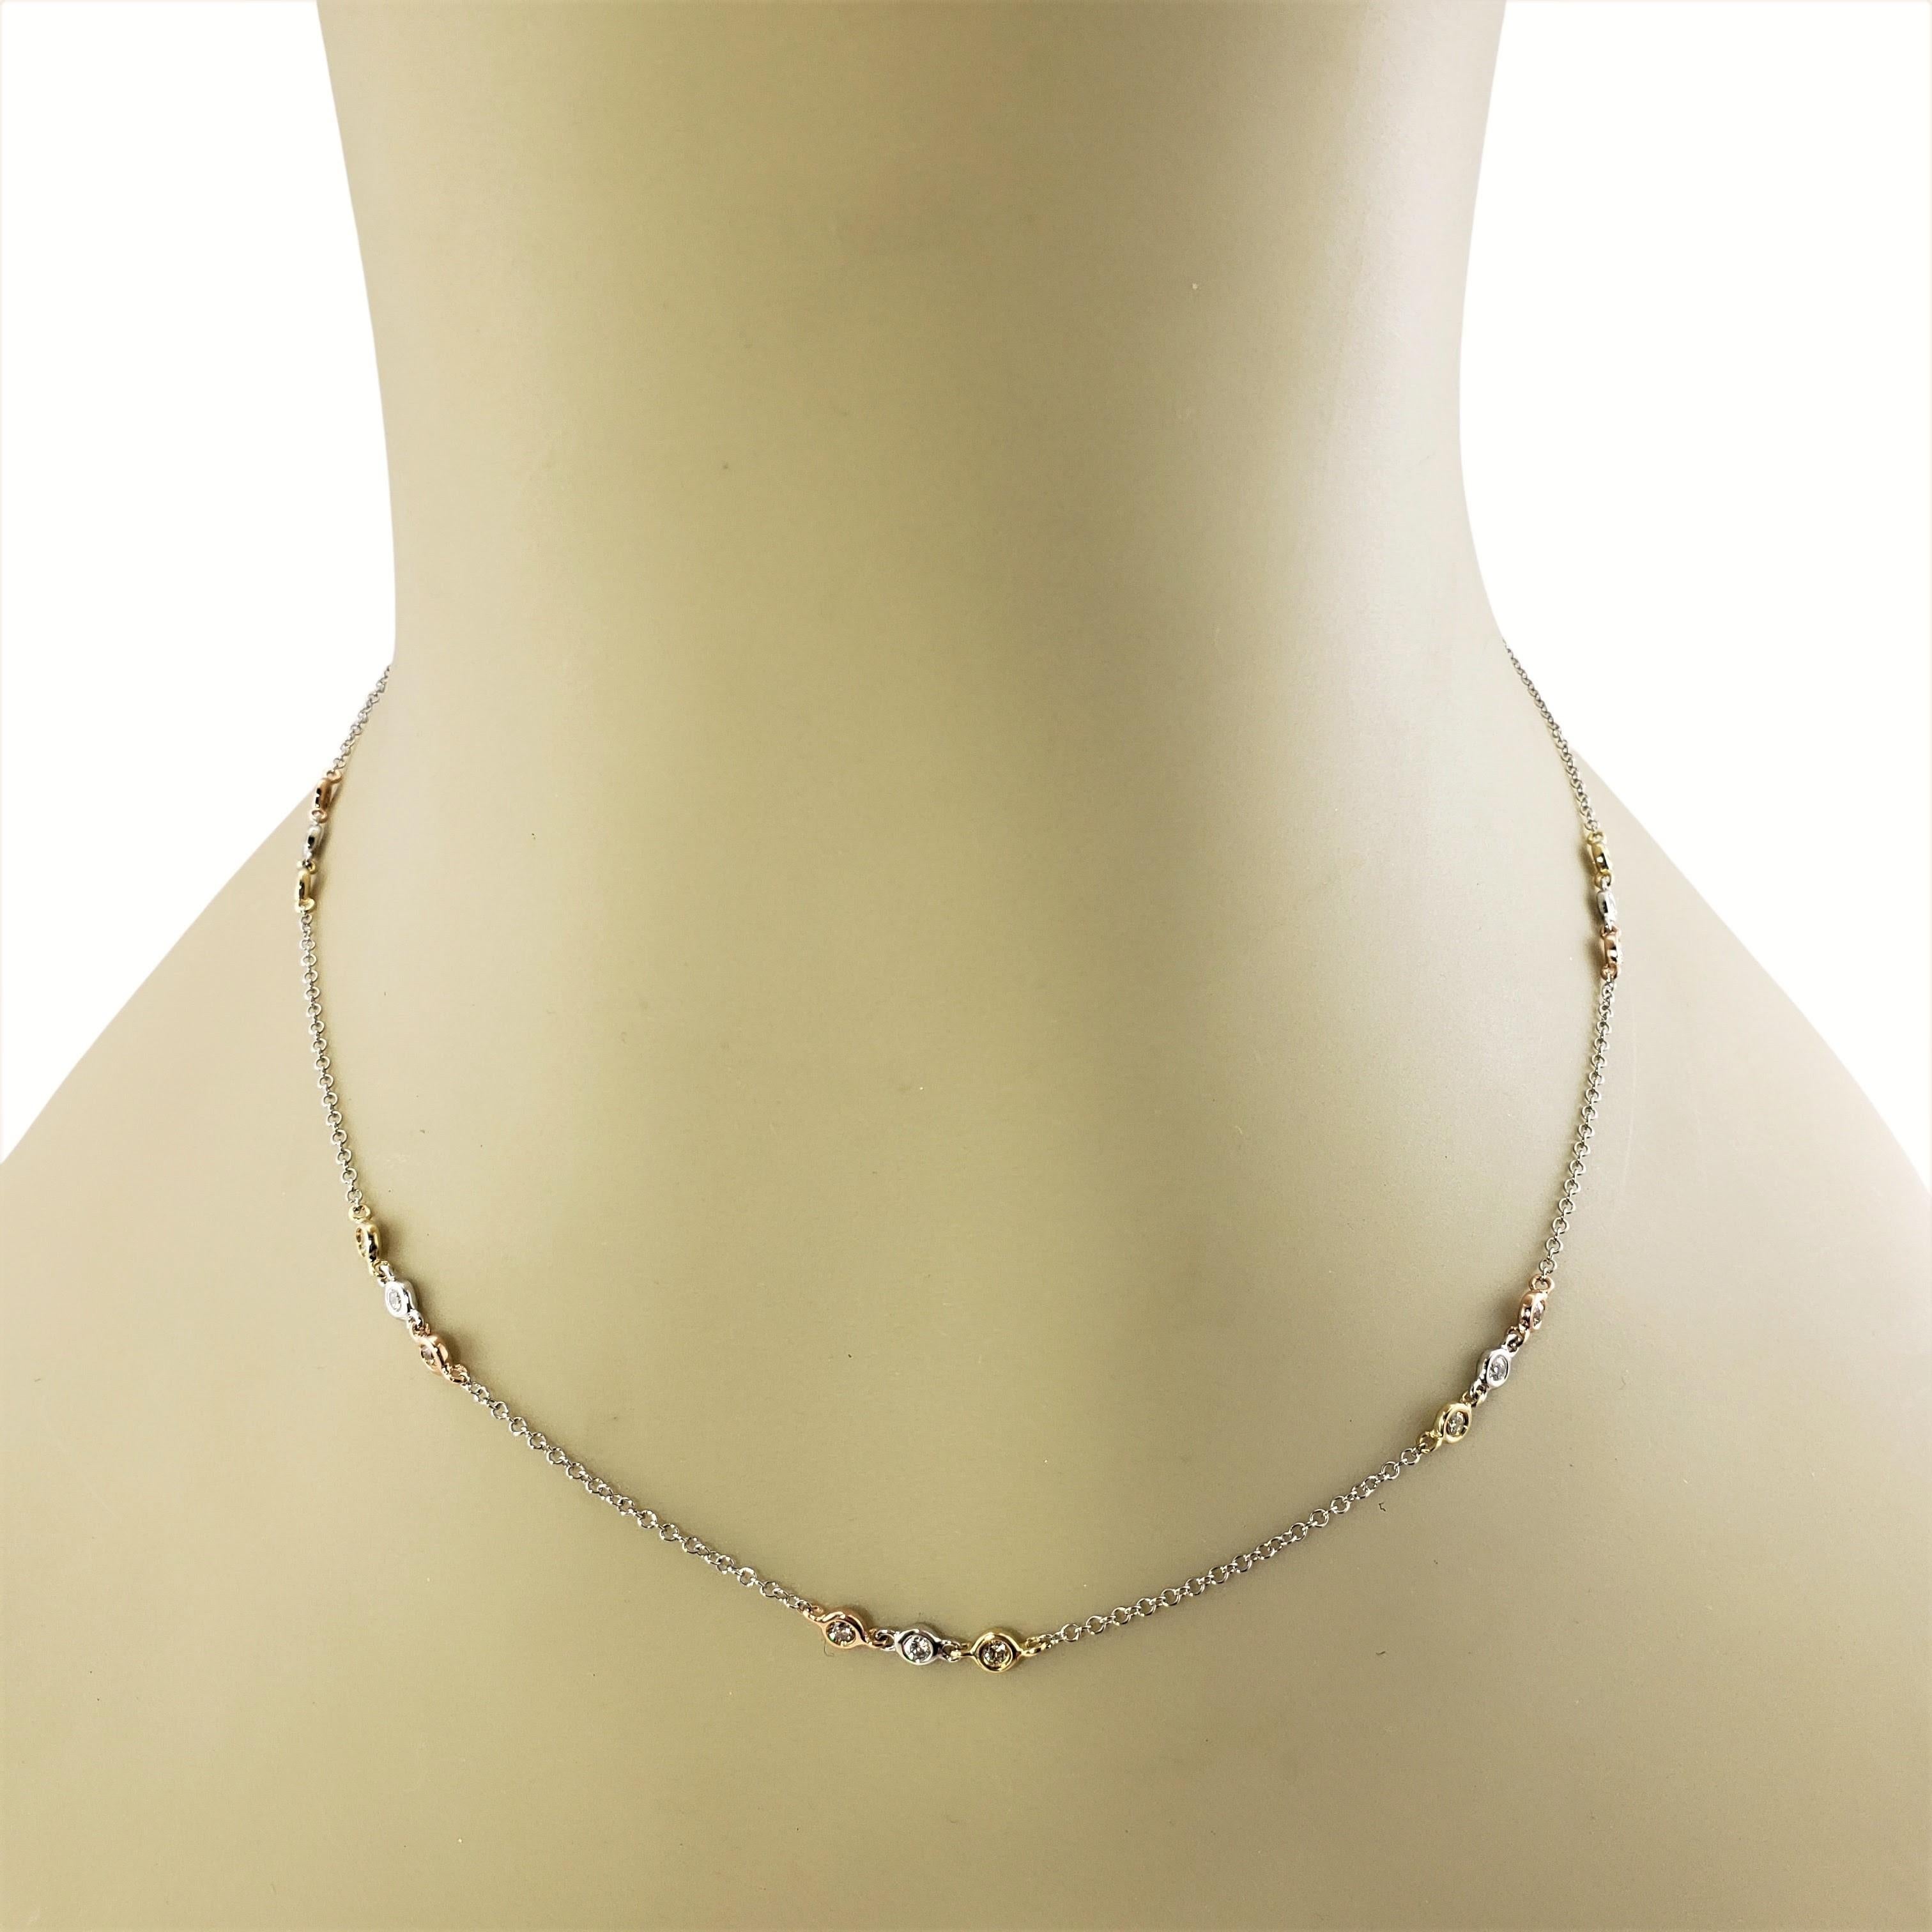 14 Karat White/Yellow/Rose Gold Diamonds by the Yard Necklace For Sale 1